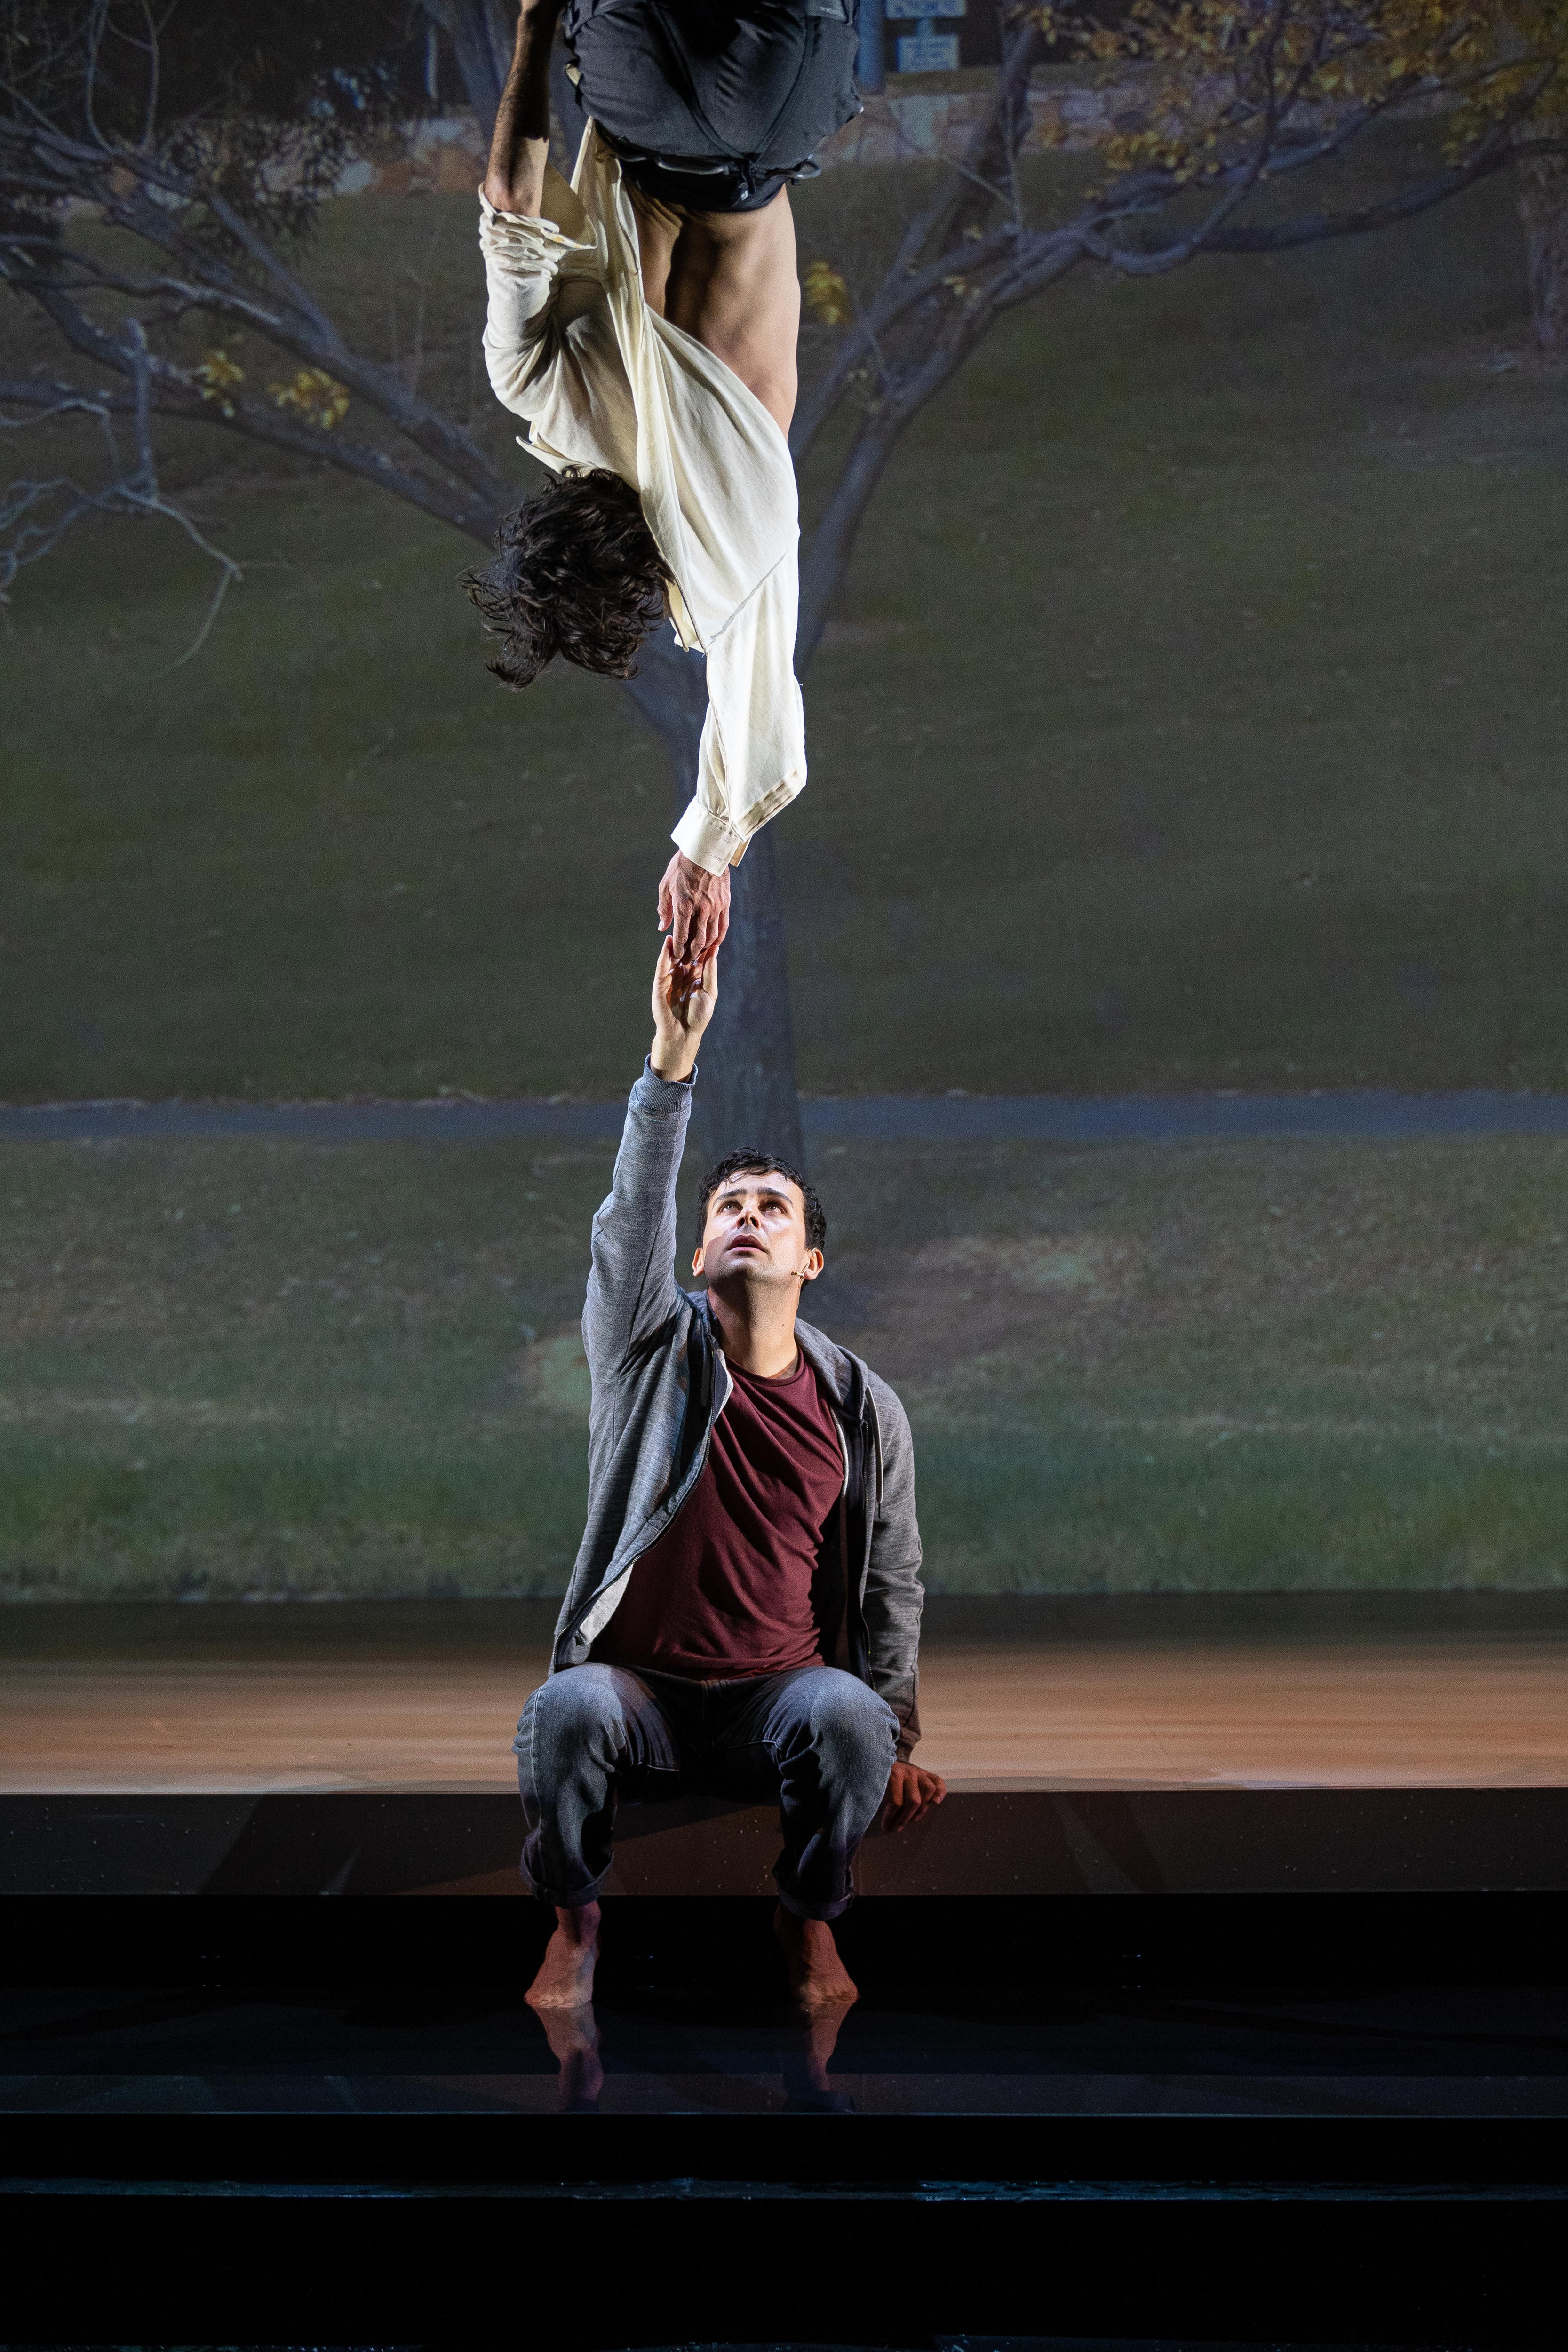 A young white man sits onstage and reaches up to touch the hand of a young white male dancer, suspended from the ceiling.